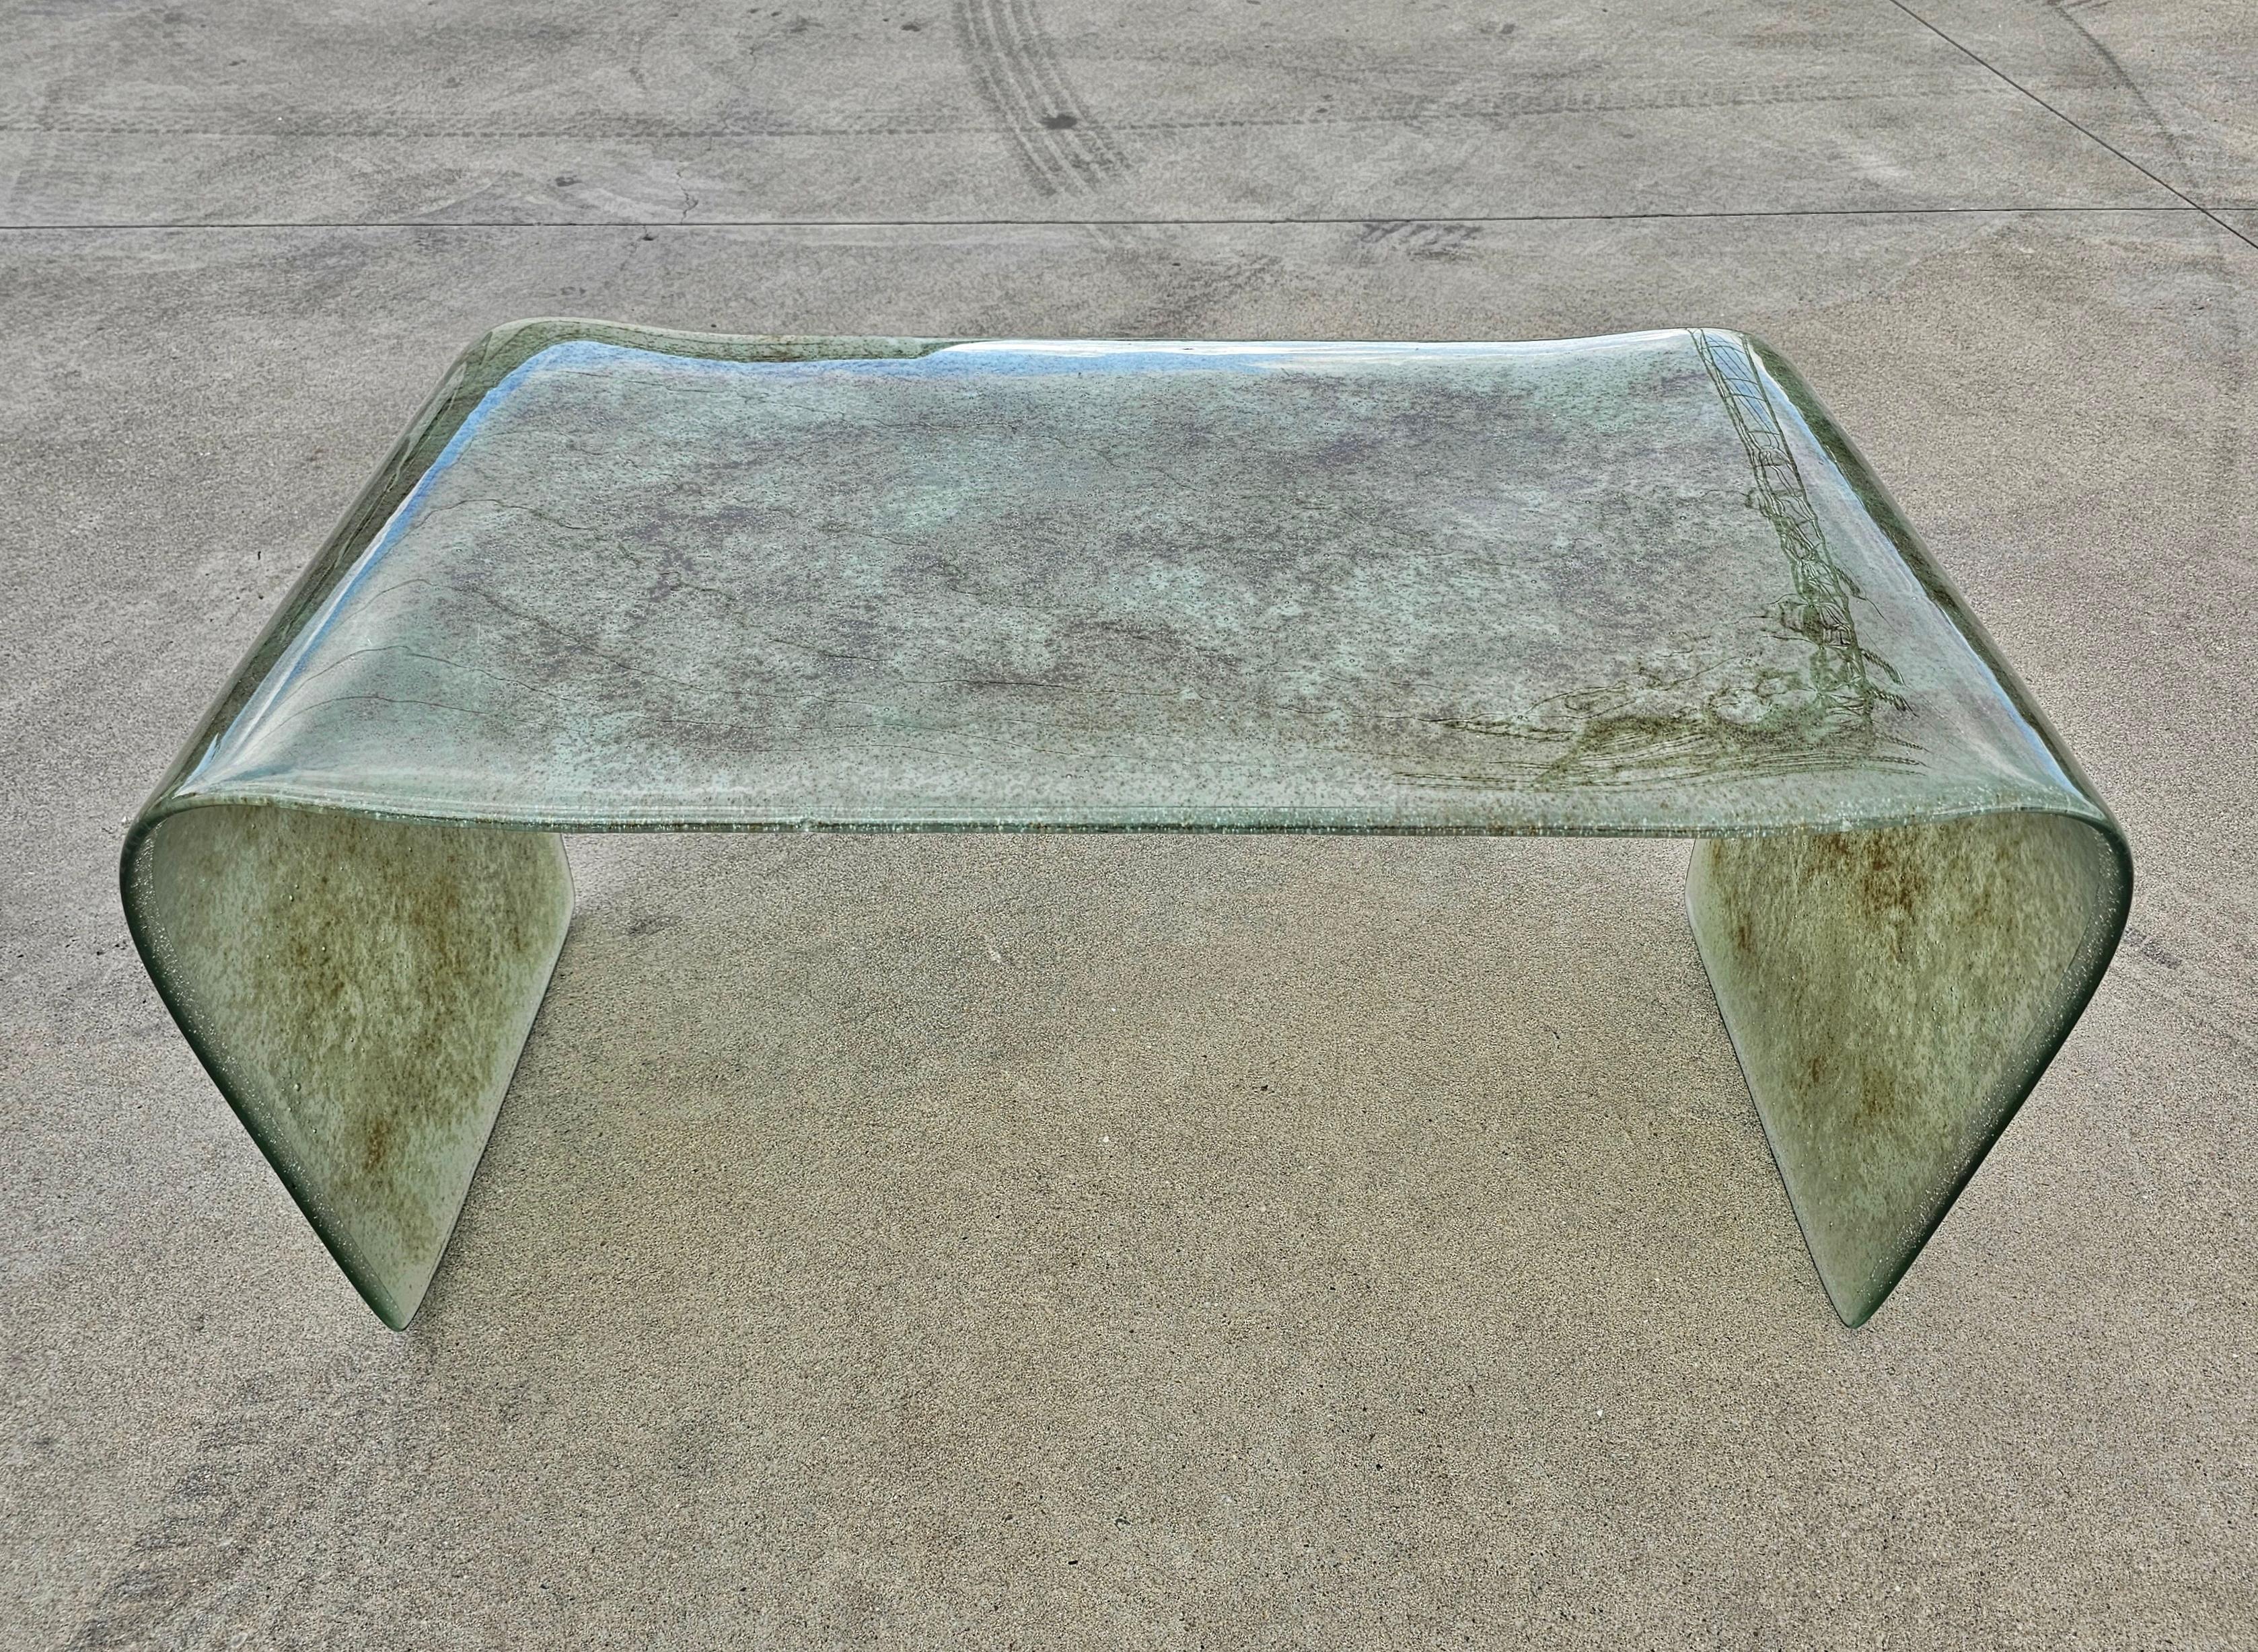 In this listing you will find a gorgeous and very rare Coffee or Sofa Waterfall Table that was handmade of a single piece of solid glass. The green/gray bubble glass features beautiful texture and very elegant uneven, almost organic lines. Table was